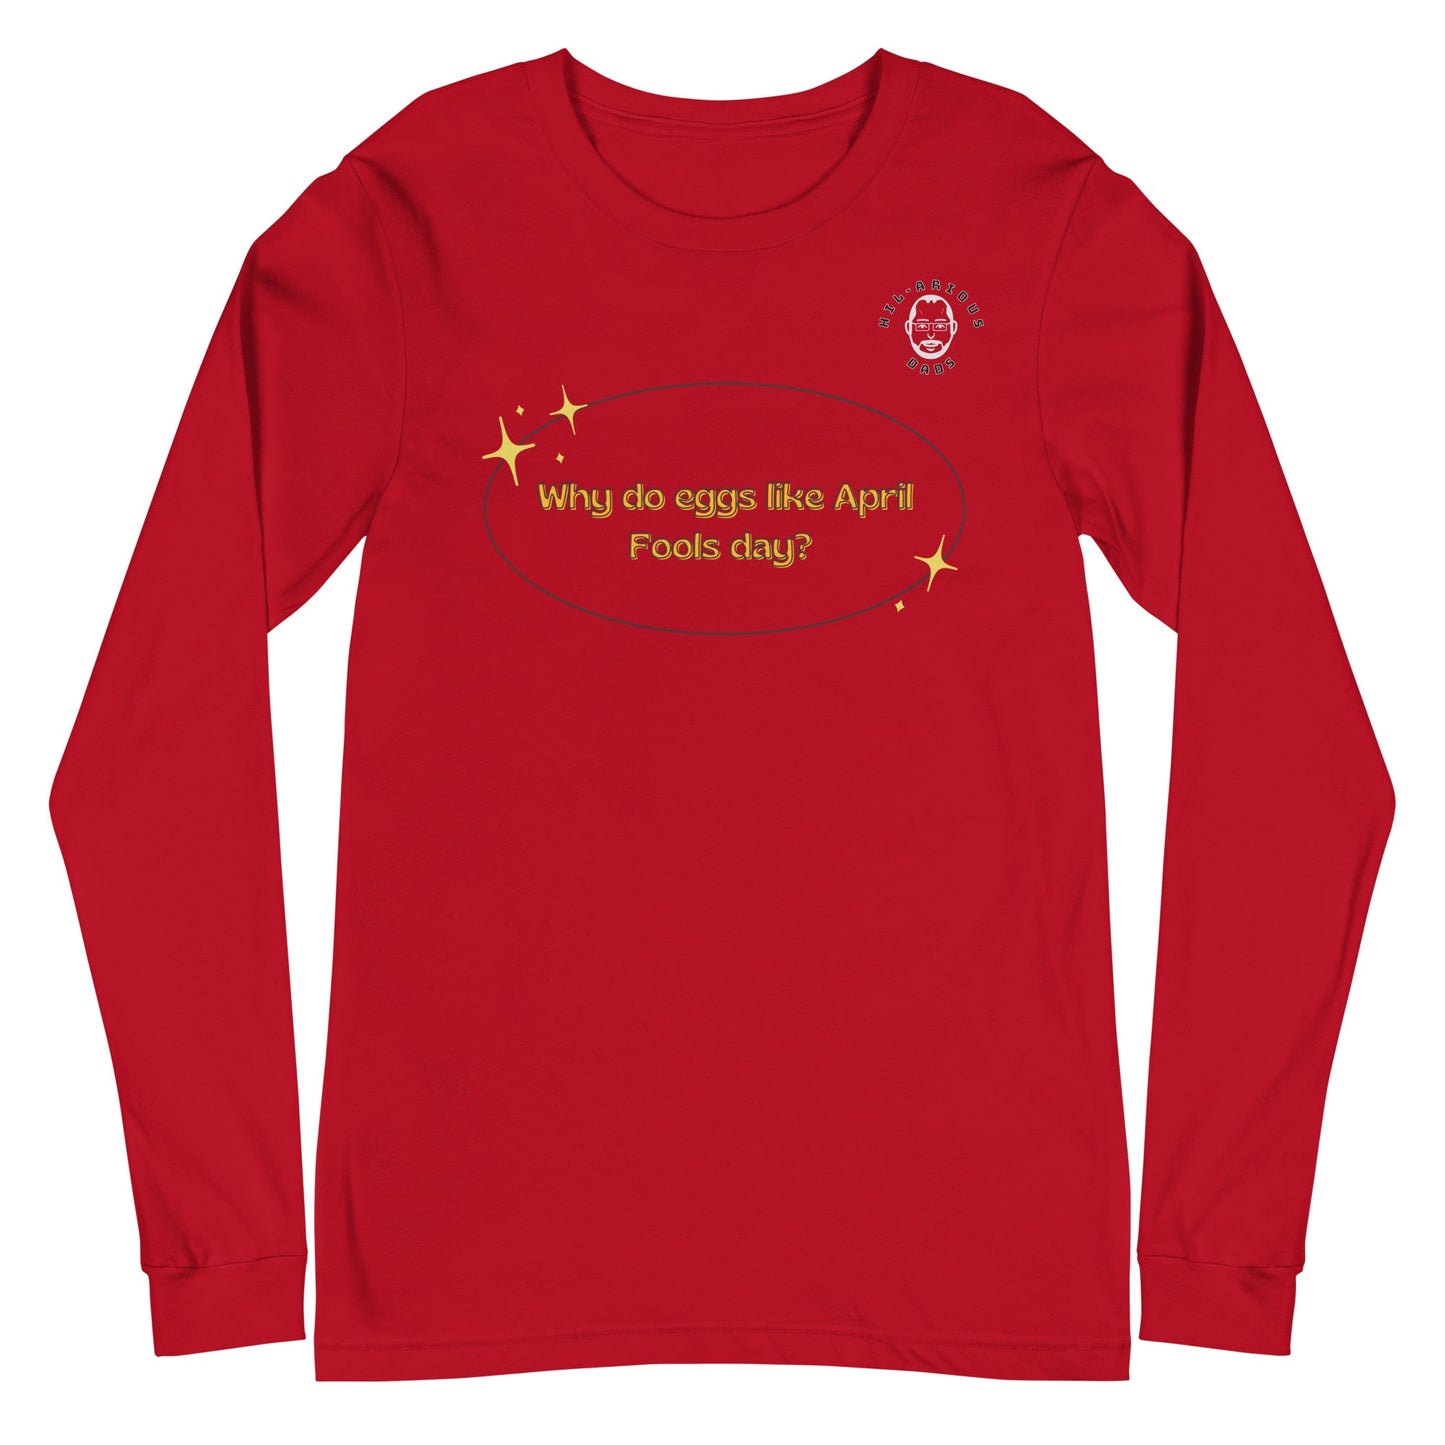 Why do eggs like April Fools day?-Long Sleeve Tee - Hil-arious Dads